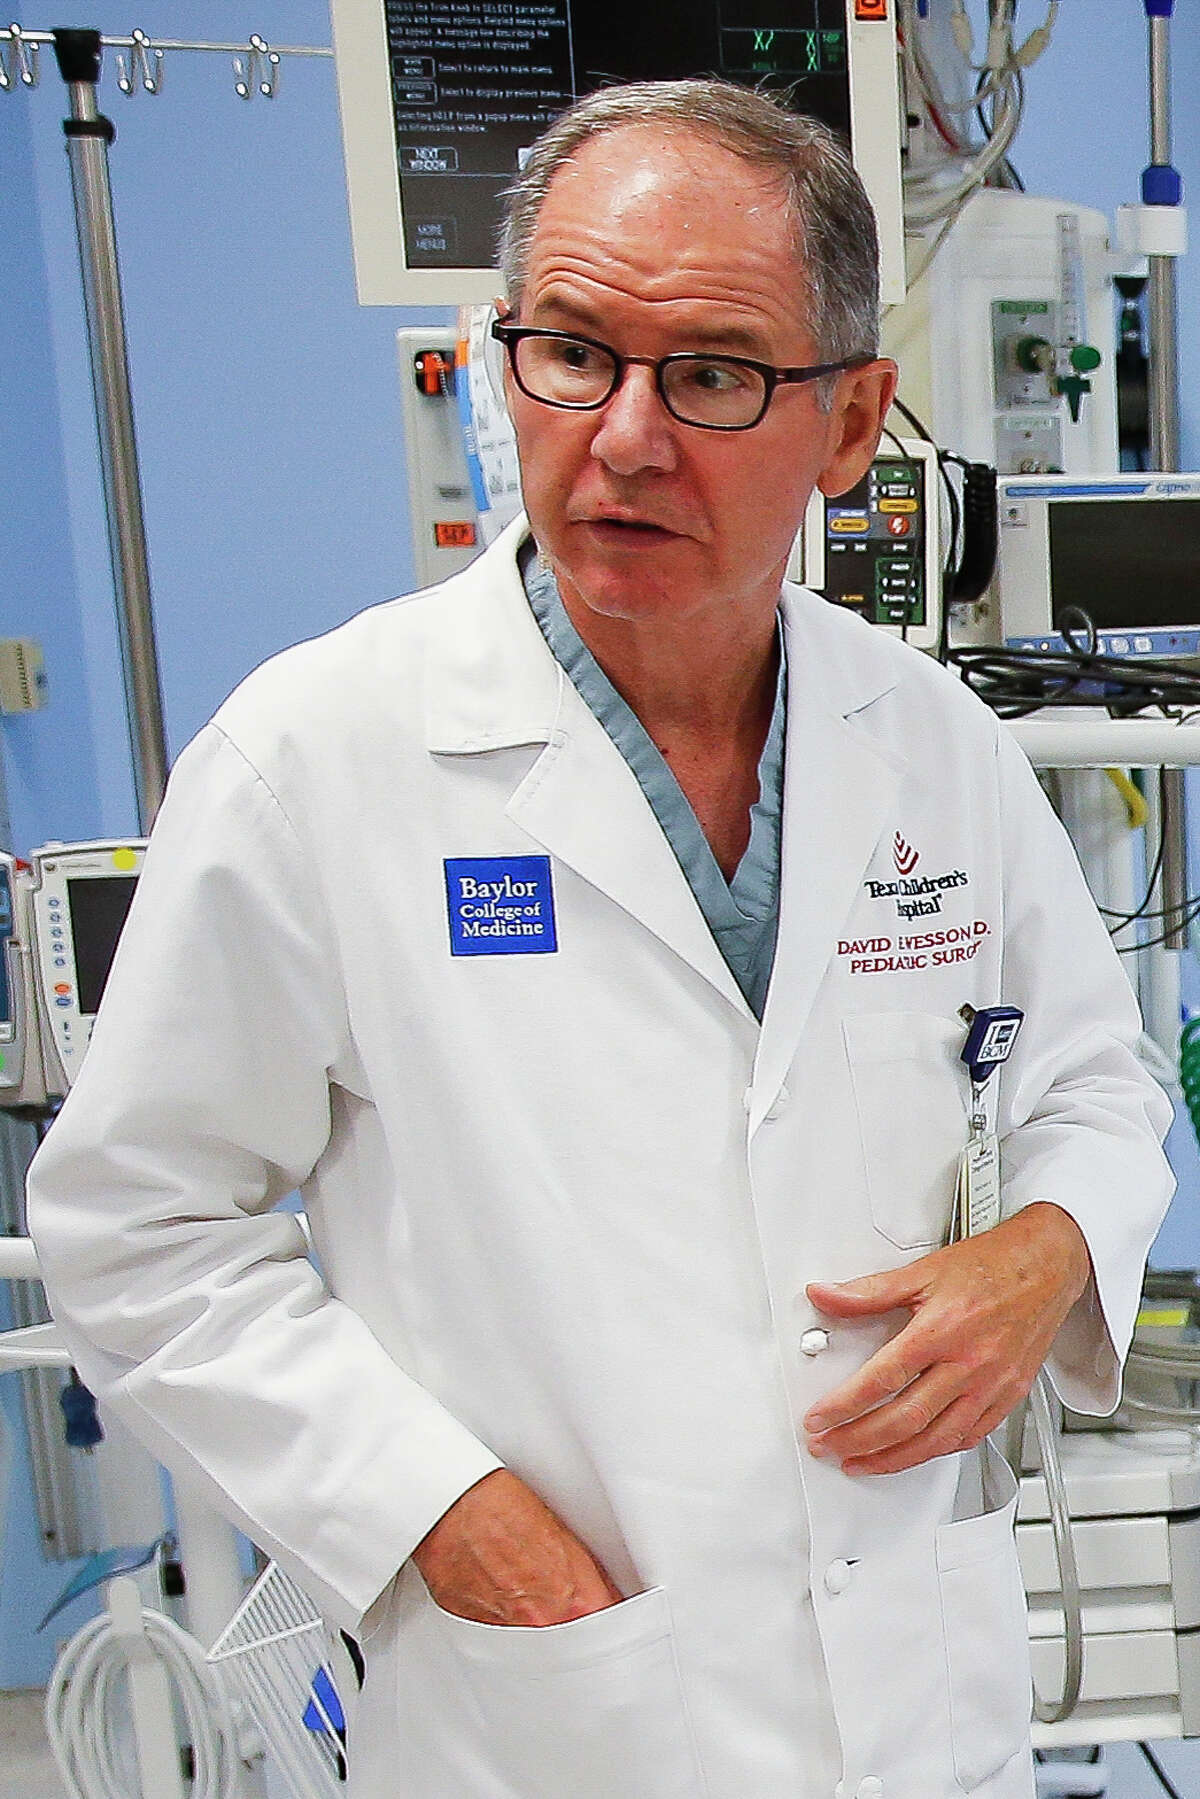 Texas Children's Hospital pediatric surgeon David Wesson in the shock trauma room at the emergency room Tuesday, August 9, 2016 in Houston.